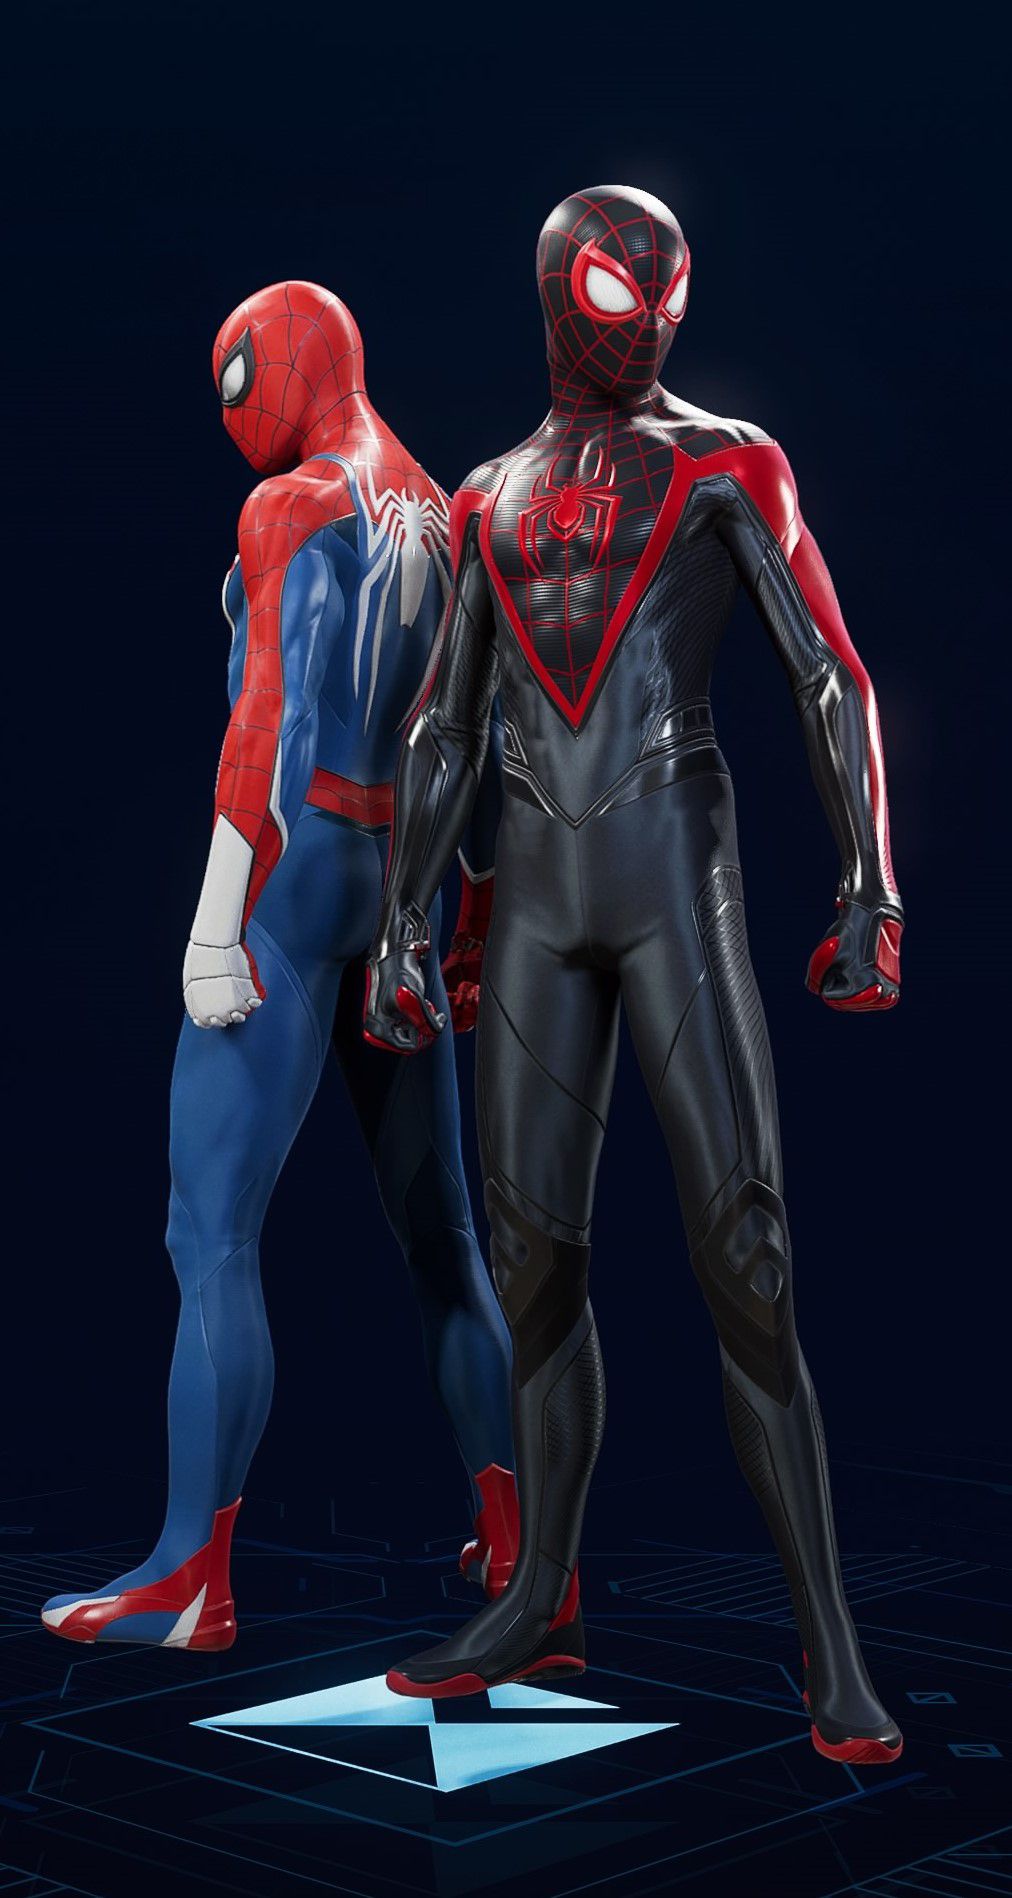 Miles Morales stands in his Upgraded Suit in the suit selection screen of Spider-Man 2.